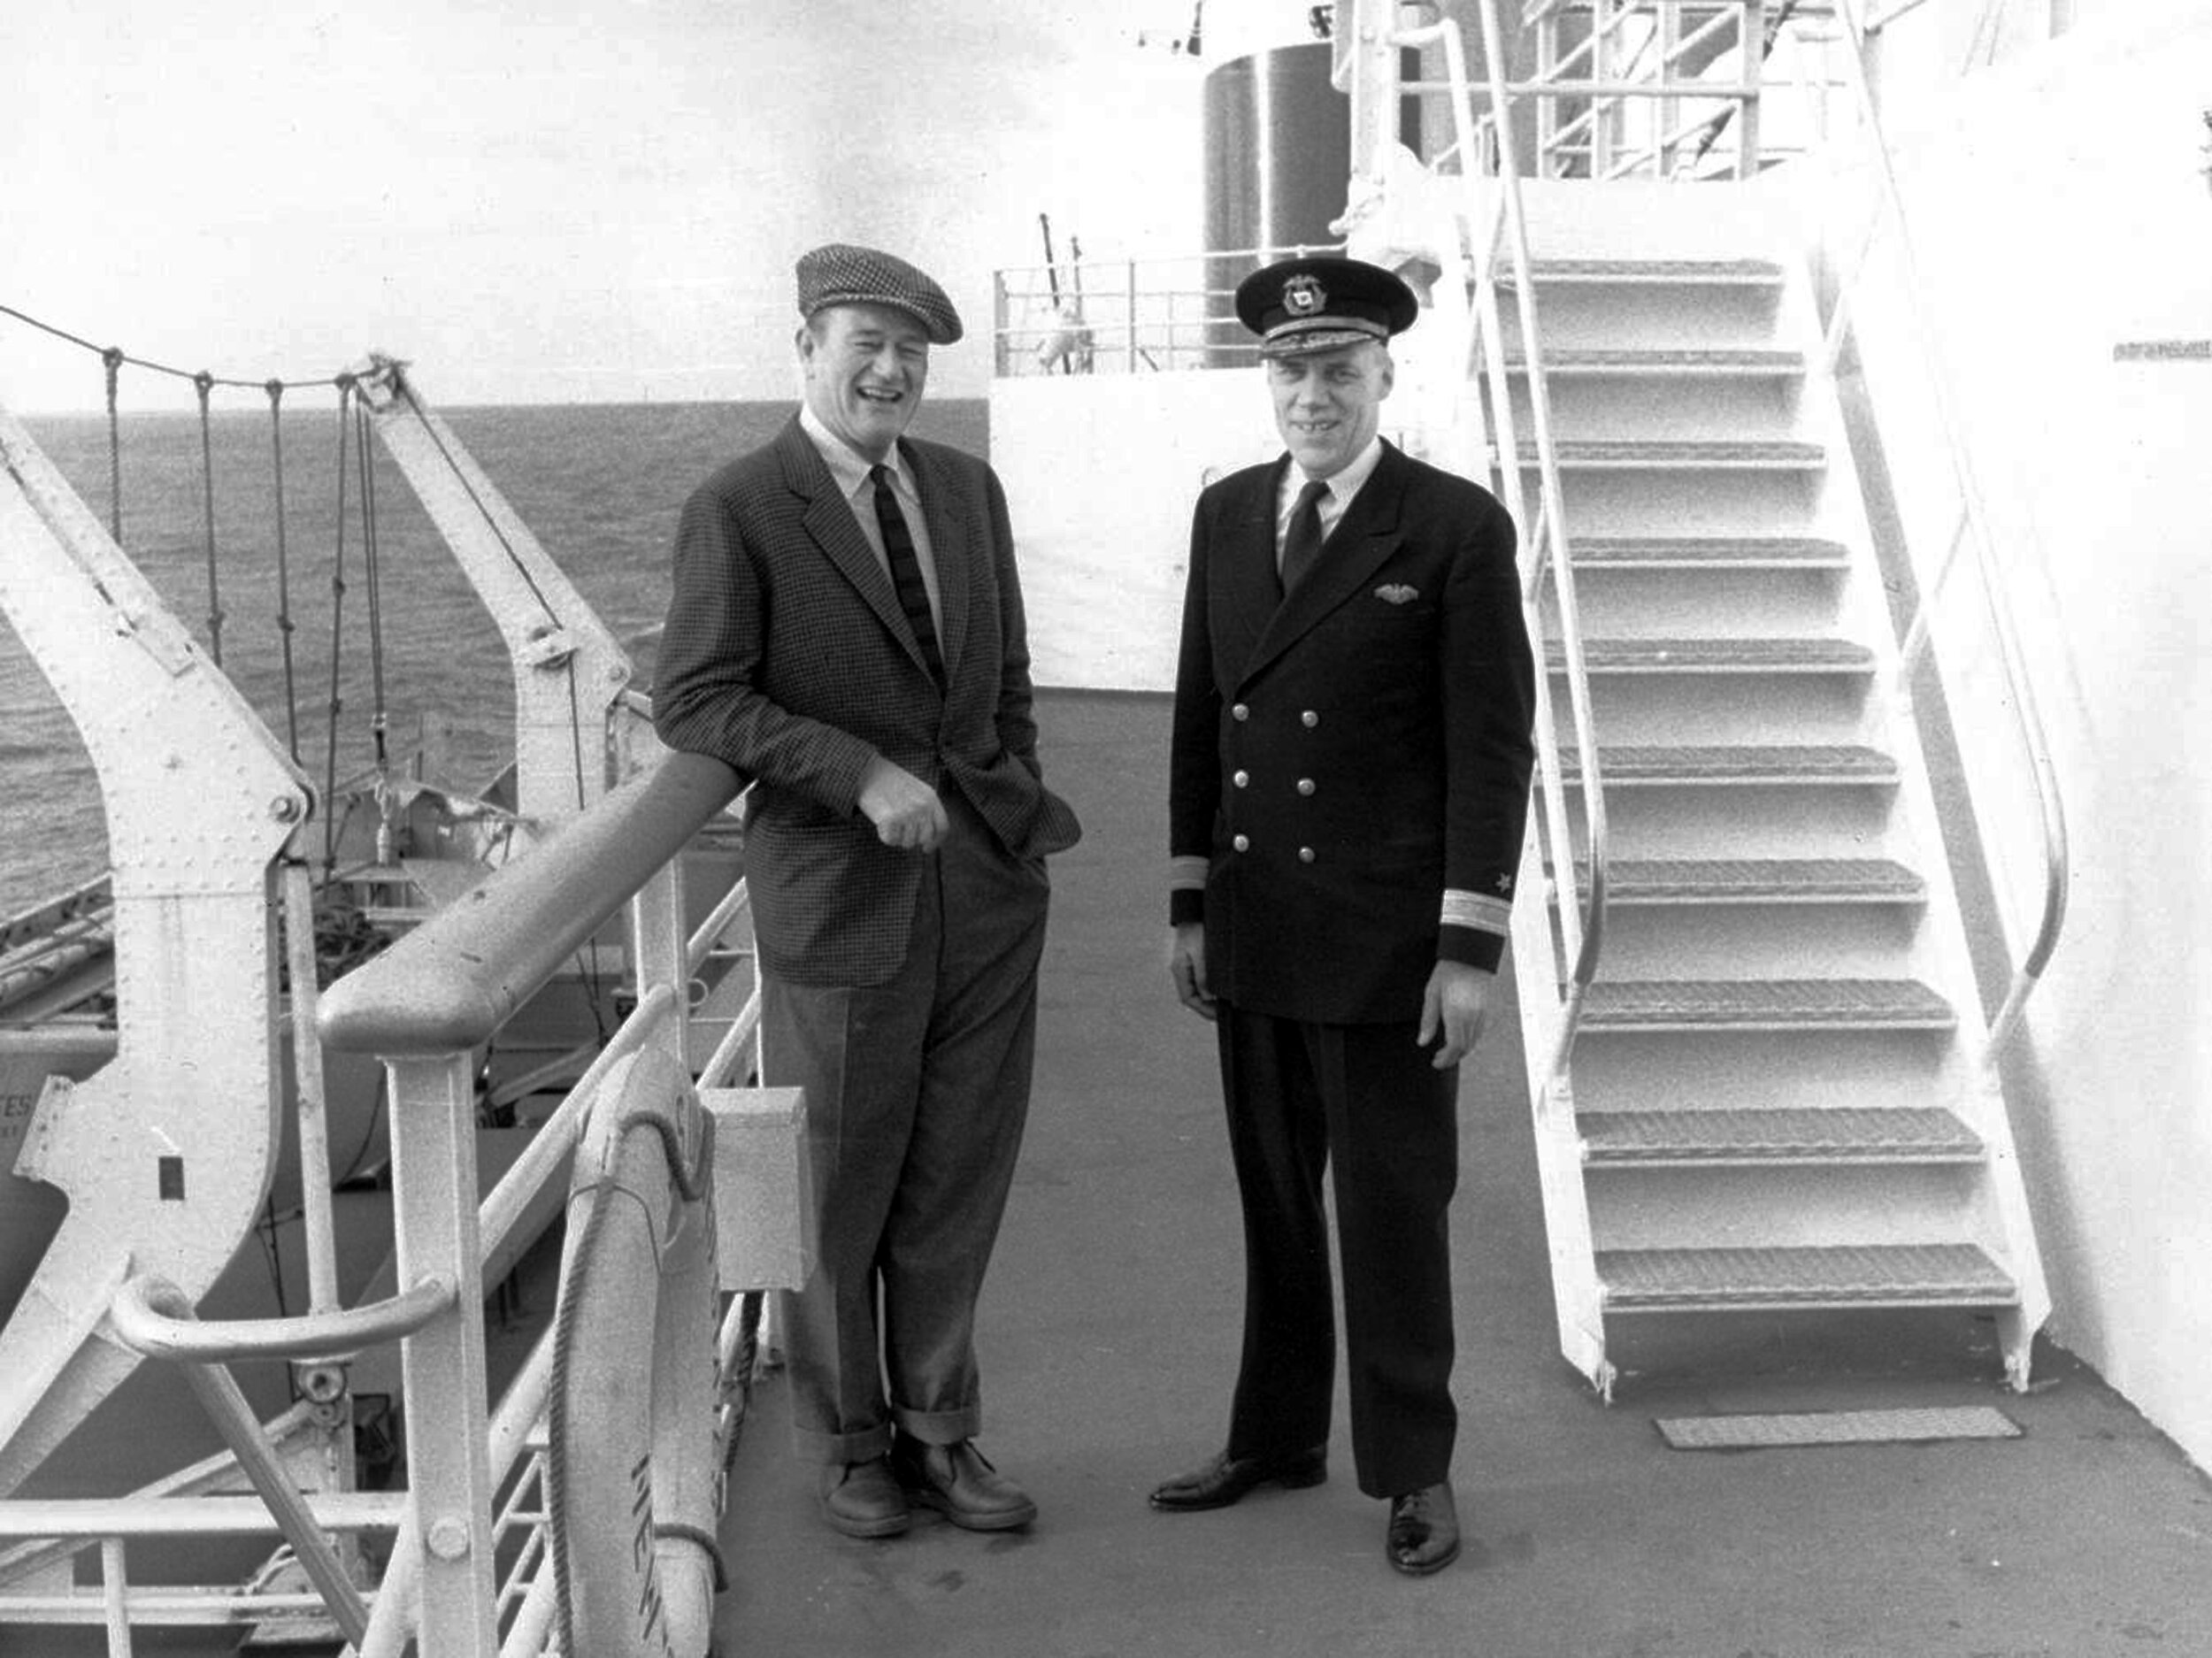 John Wayne with Commodore John Anderson on the Sports Deck